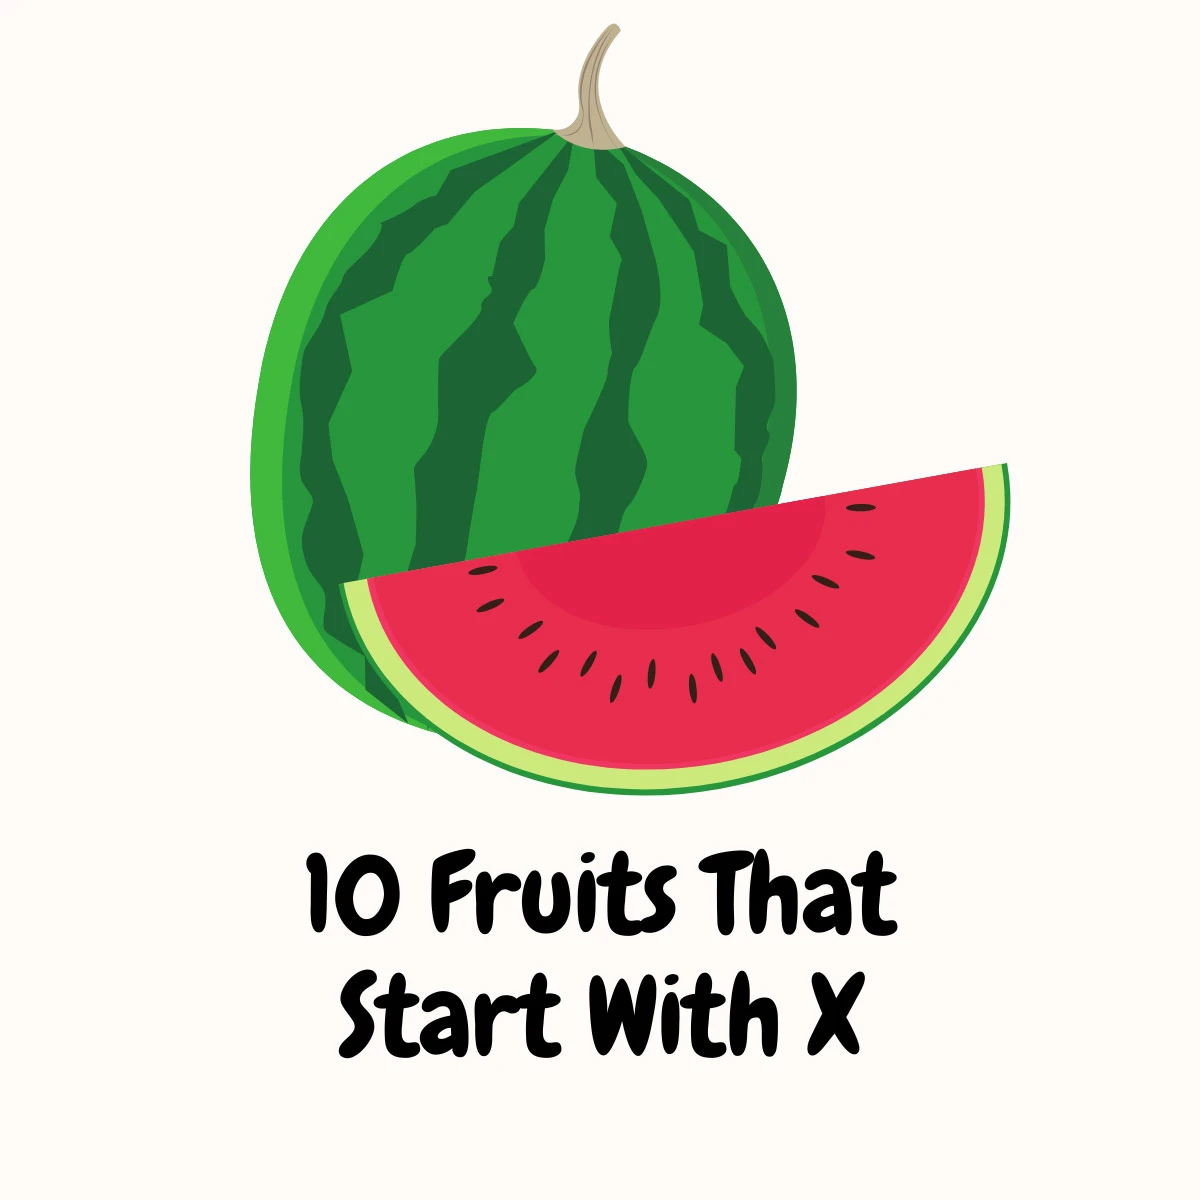 Fruits That Start With X featured image | Girl Meets Food